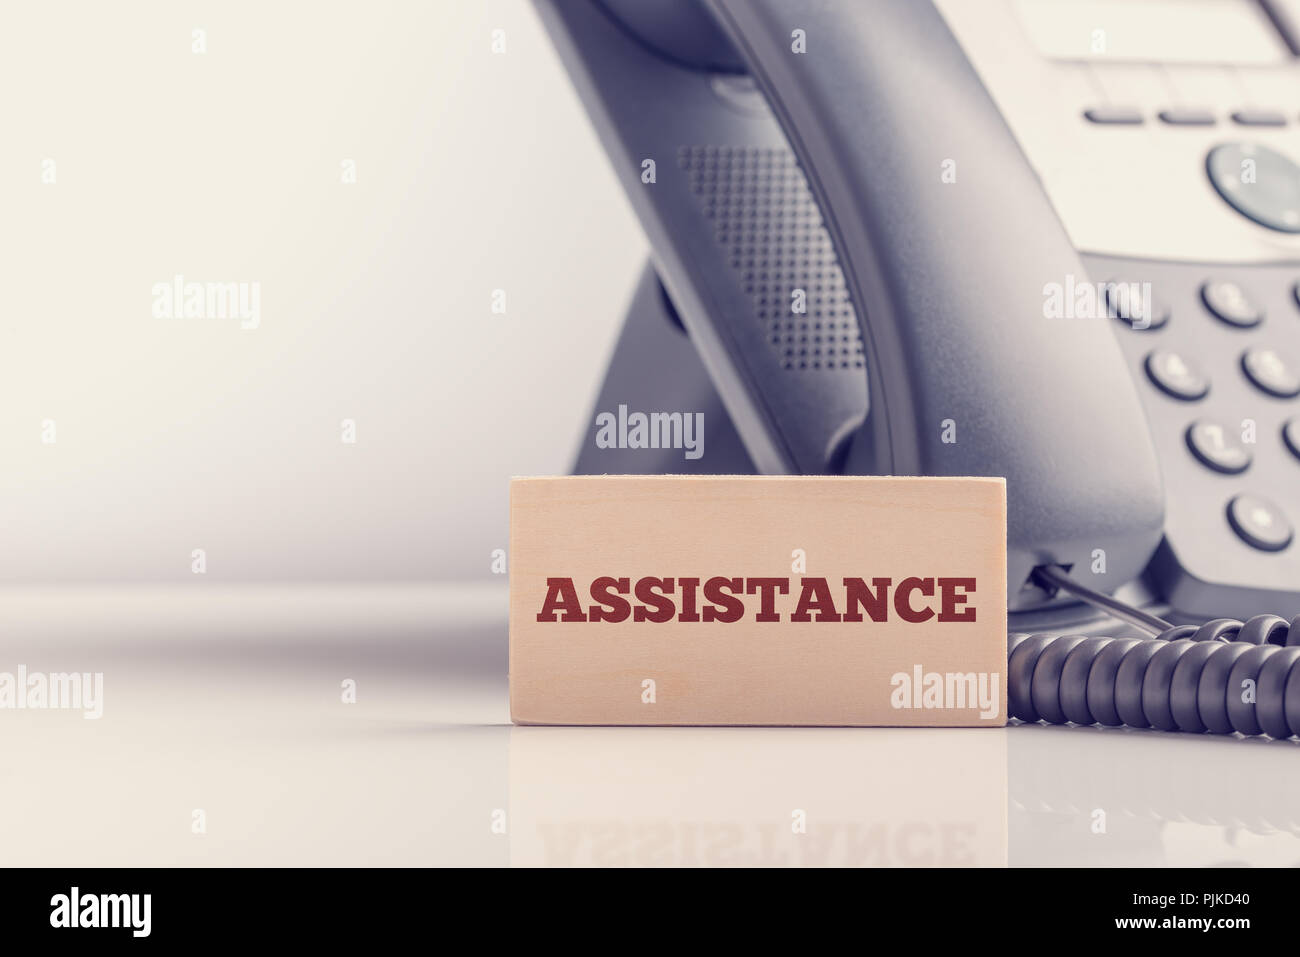 Retro image of support concept with a small wooden sign saying - Assistance - standing alongside a telephone instrument with copyspace. Stock Photo